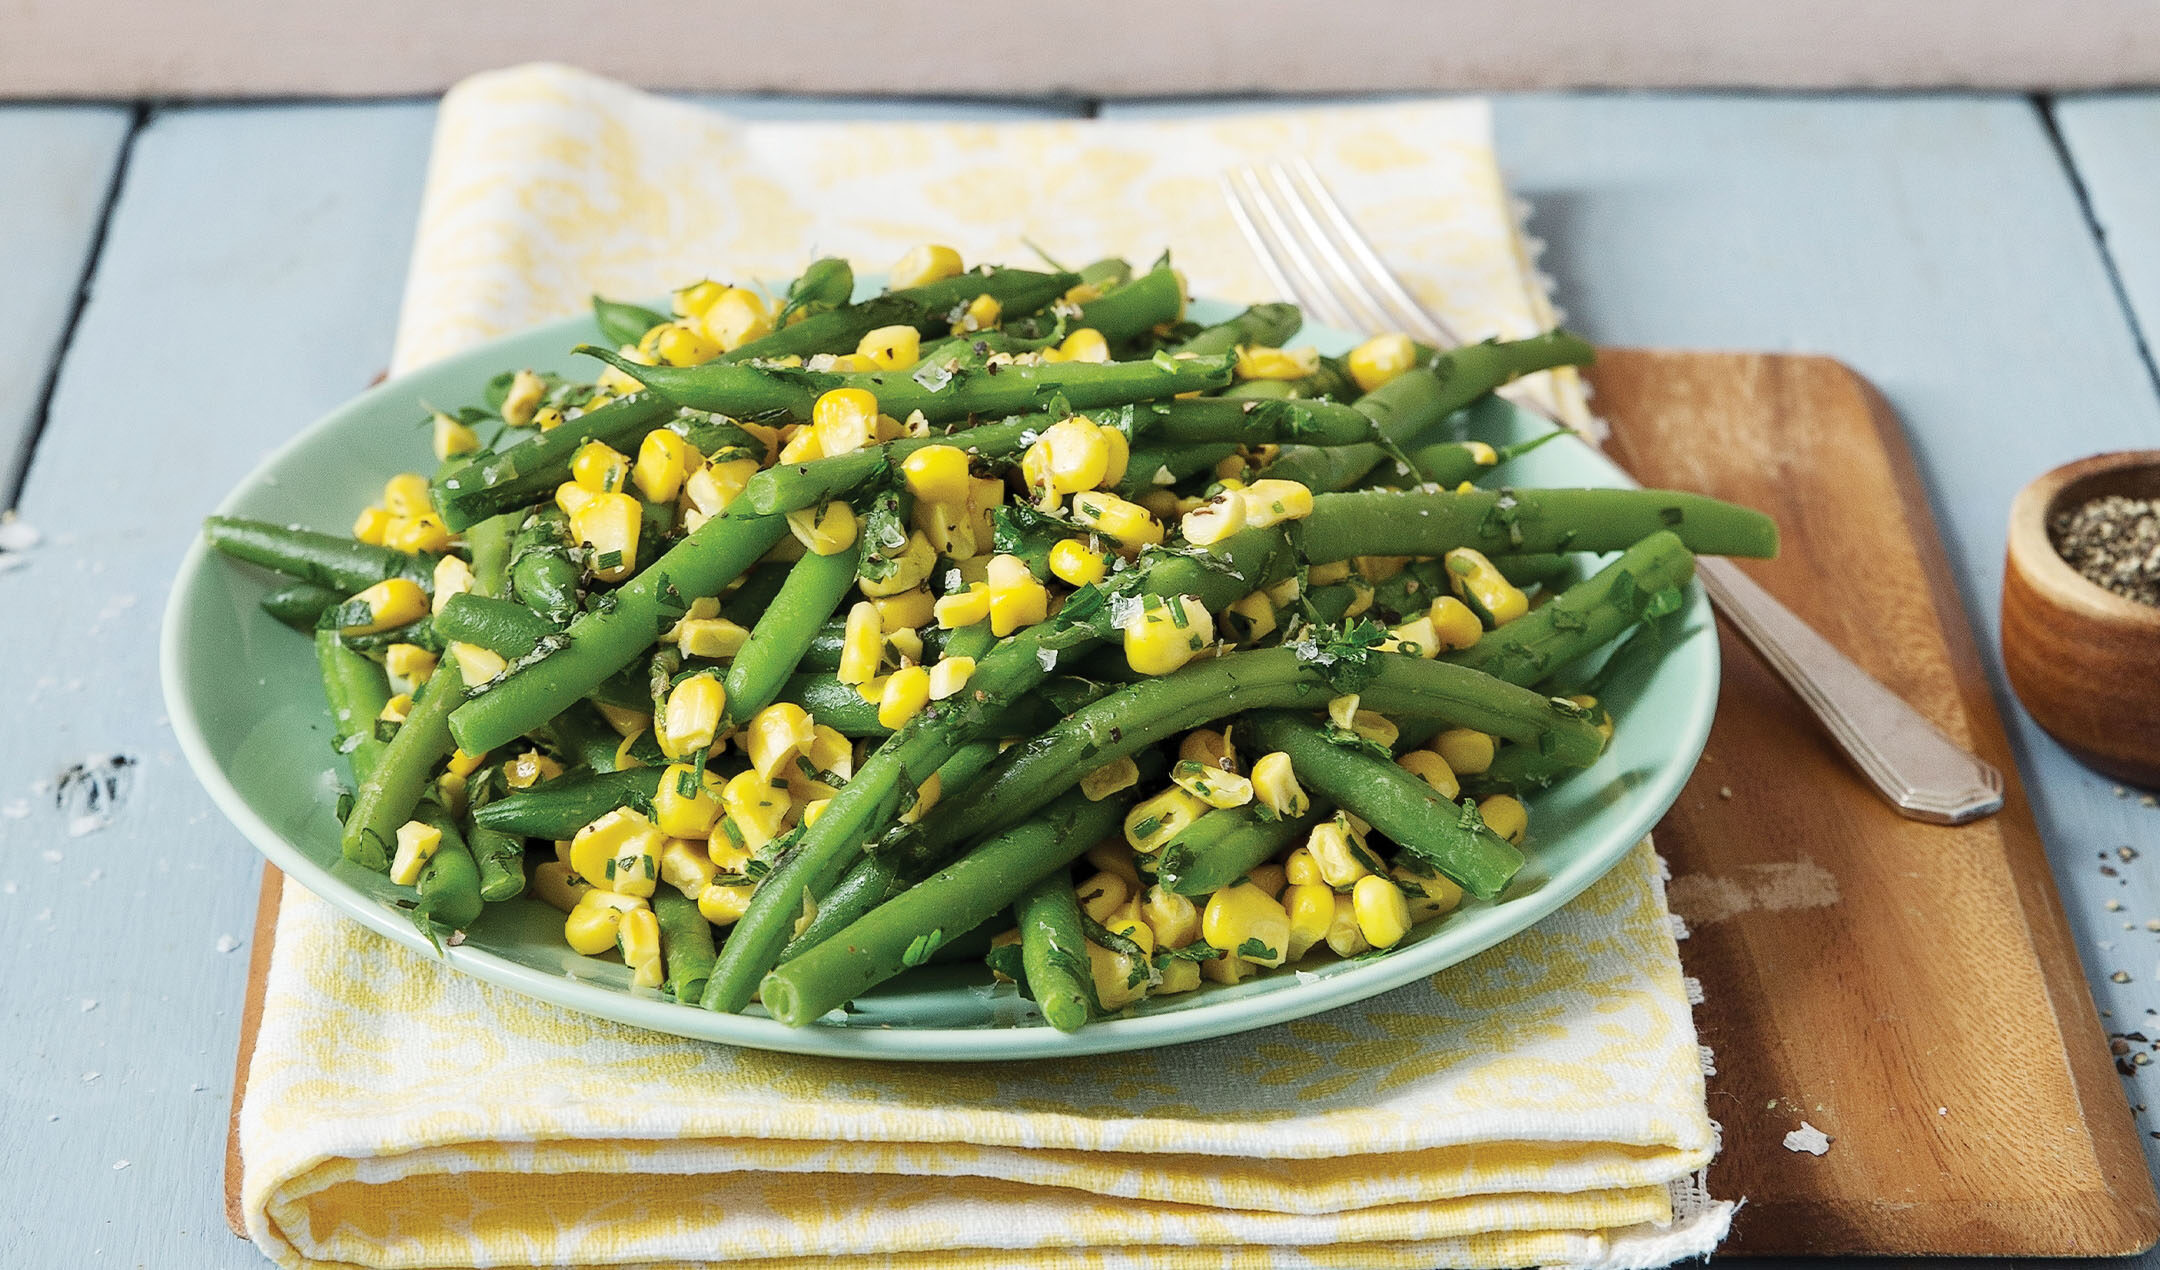 Sweetcorn and green beans with herby butter recipe | easyFood